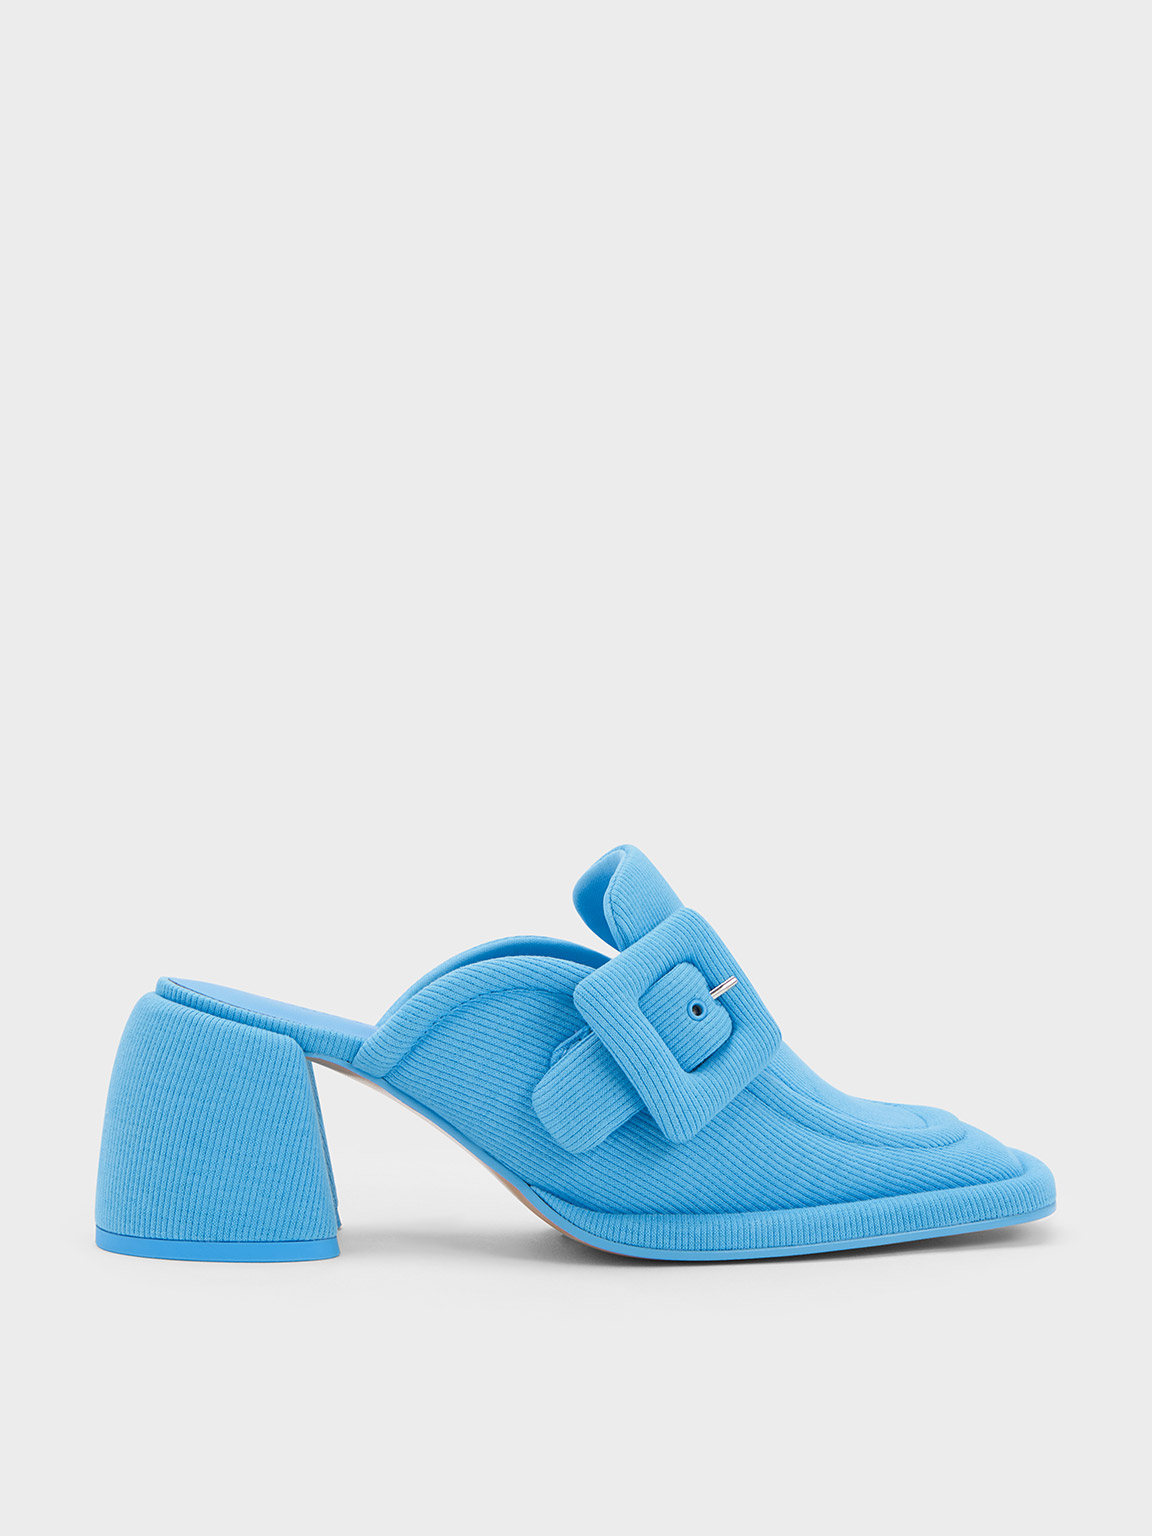 Charles & Keith Woven Buckled Loafer Mules In Blue